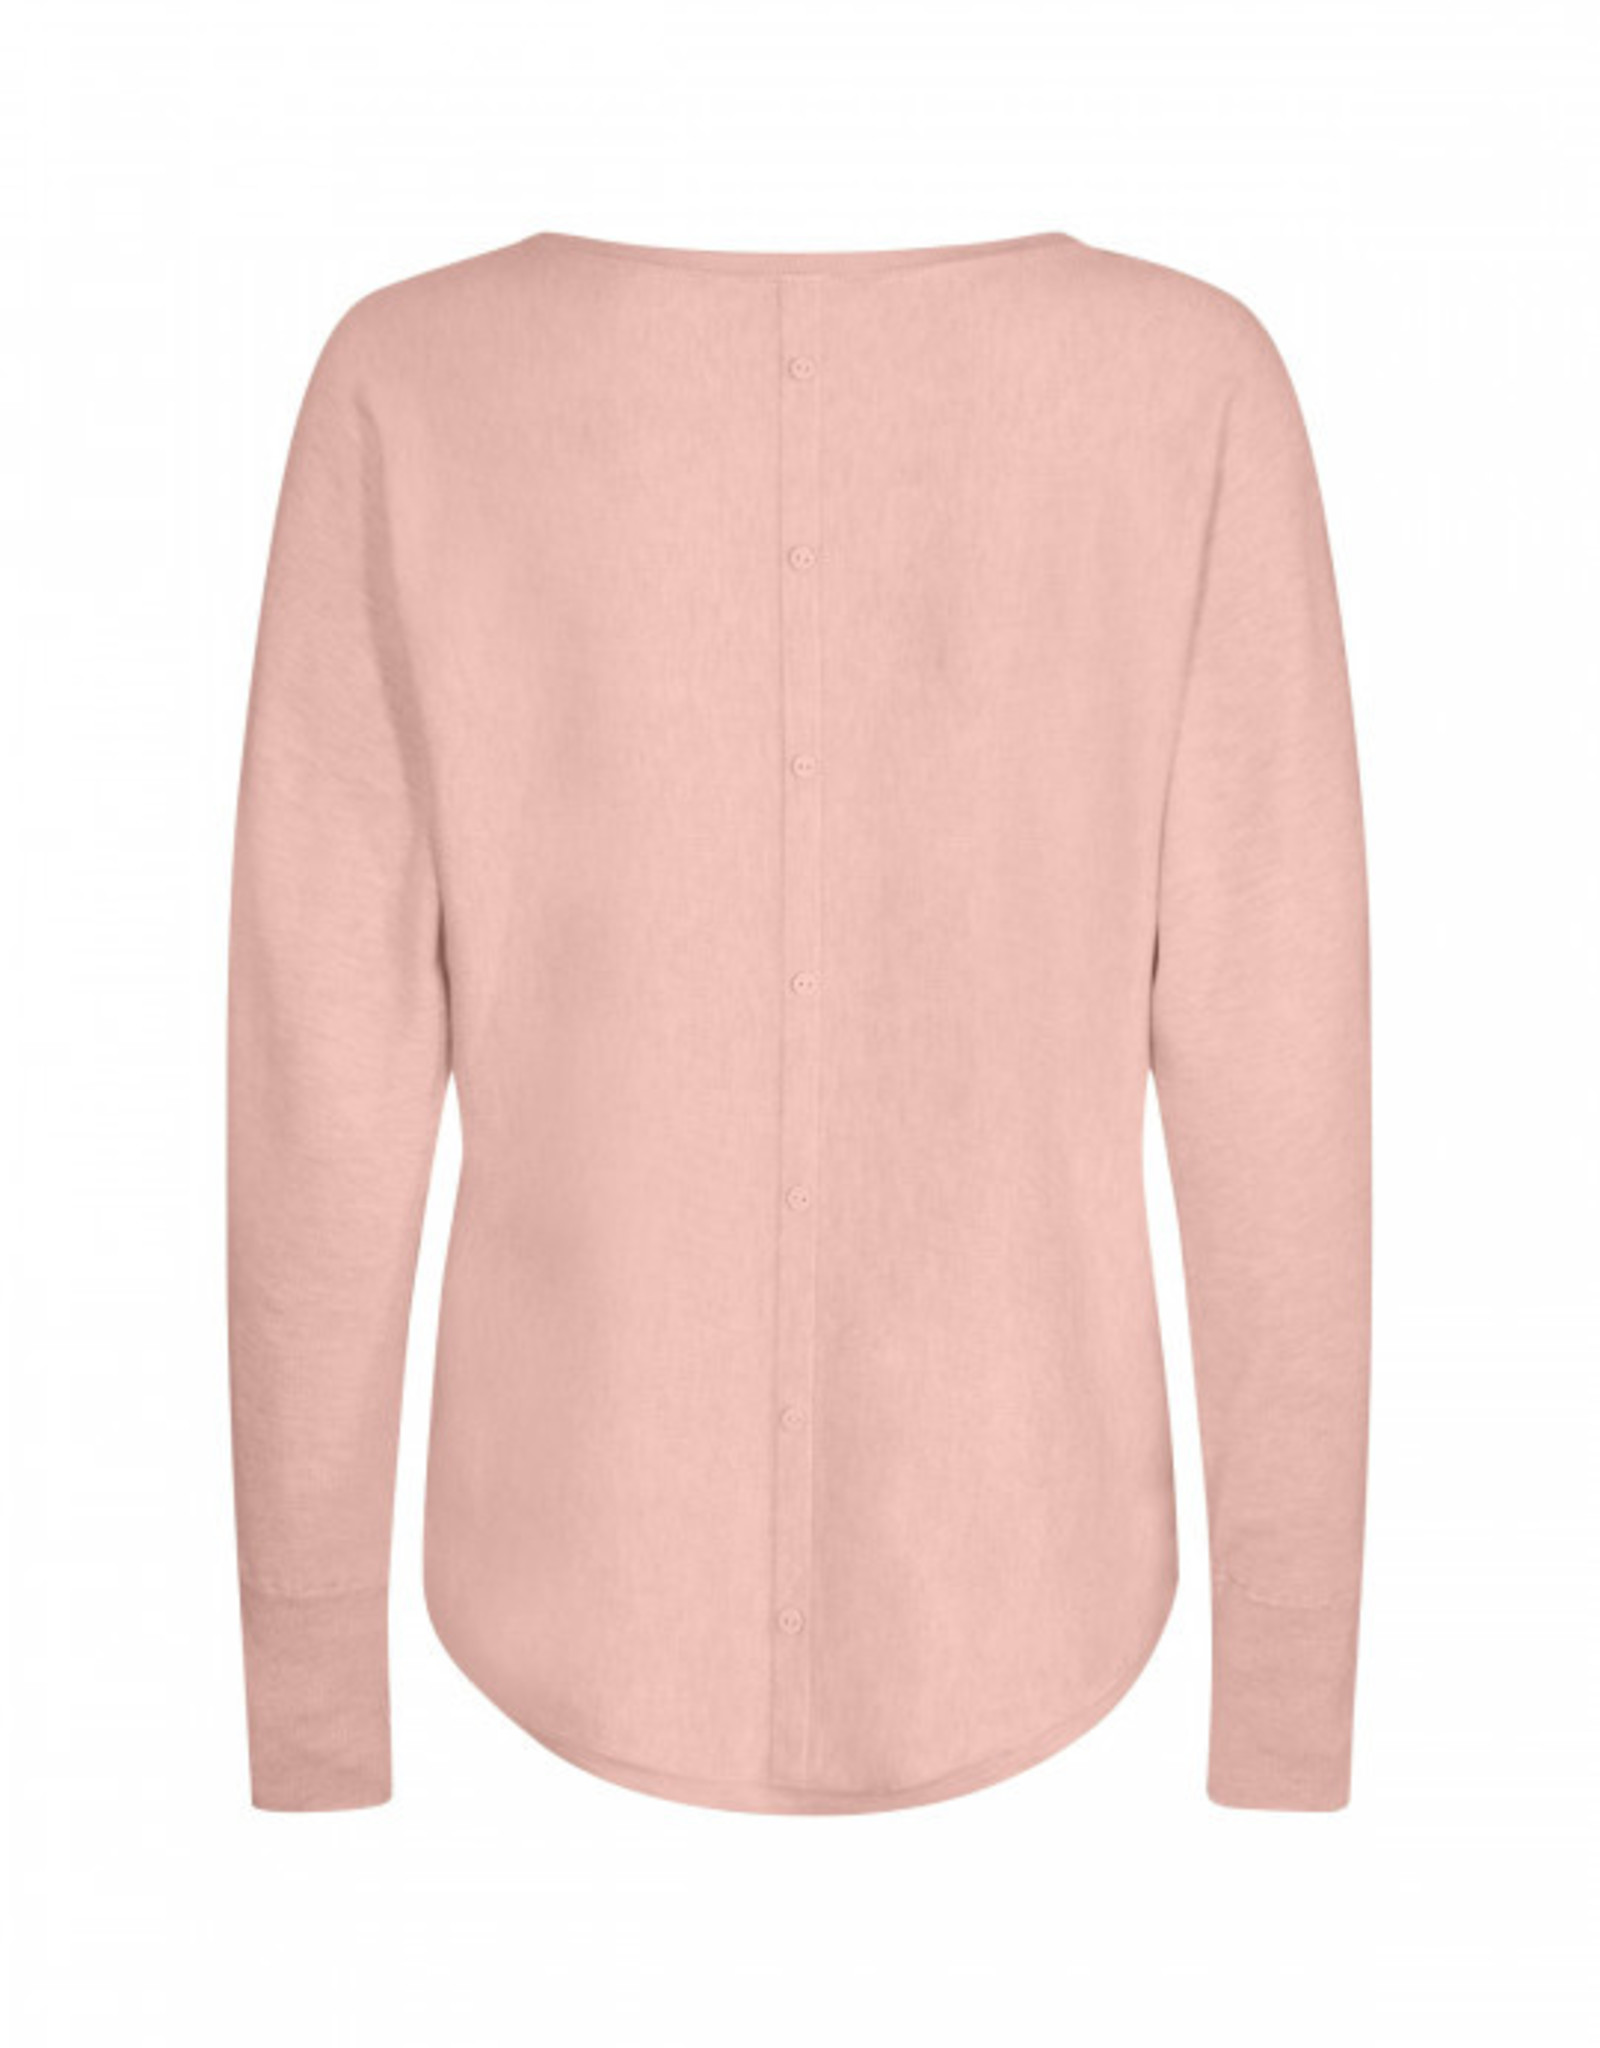 Soya Concept Soya Concept Dollie 620 Knit Round Neck Sweater with Button Detail Down the Back